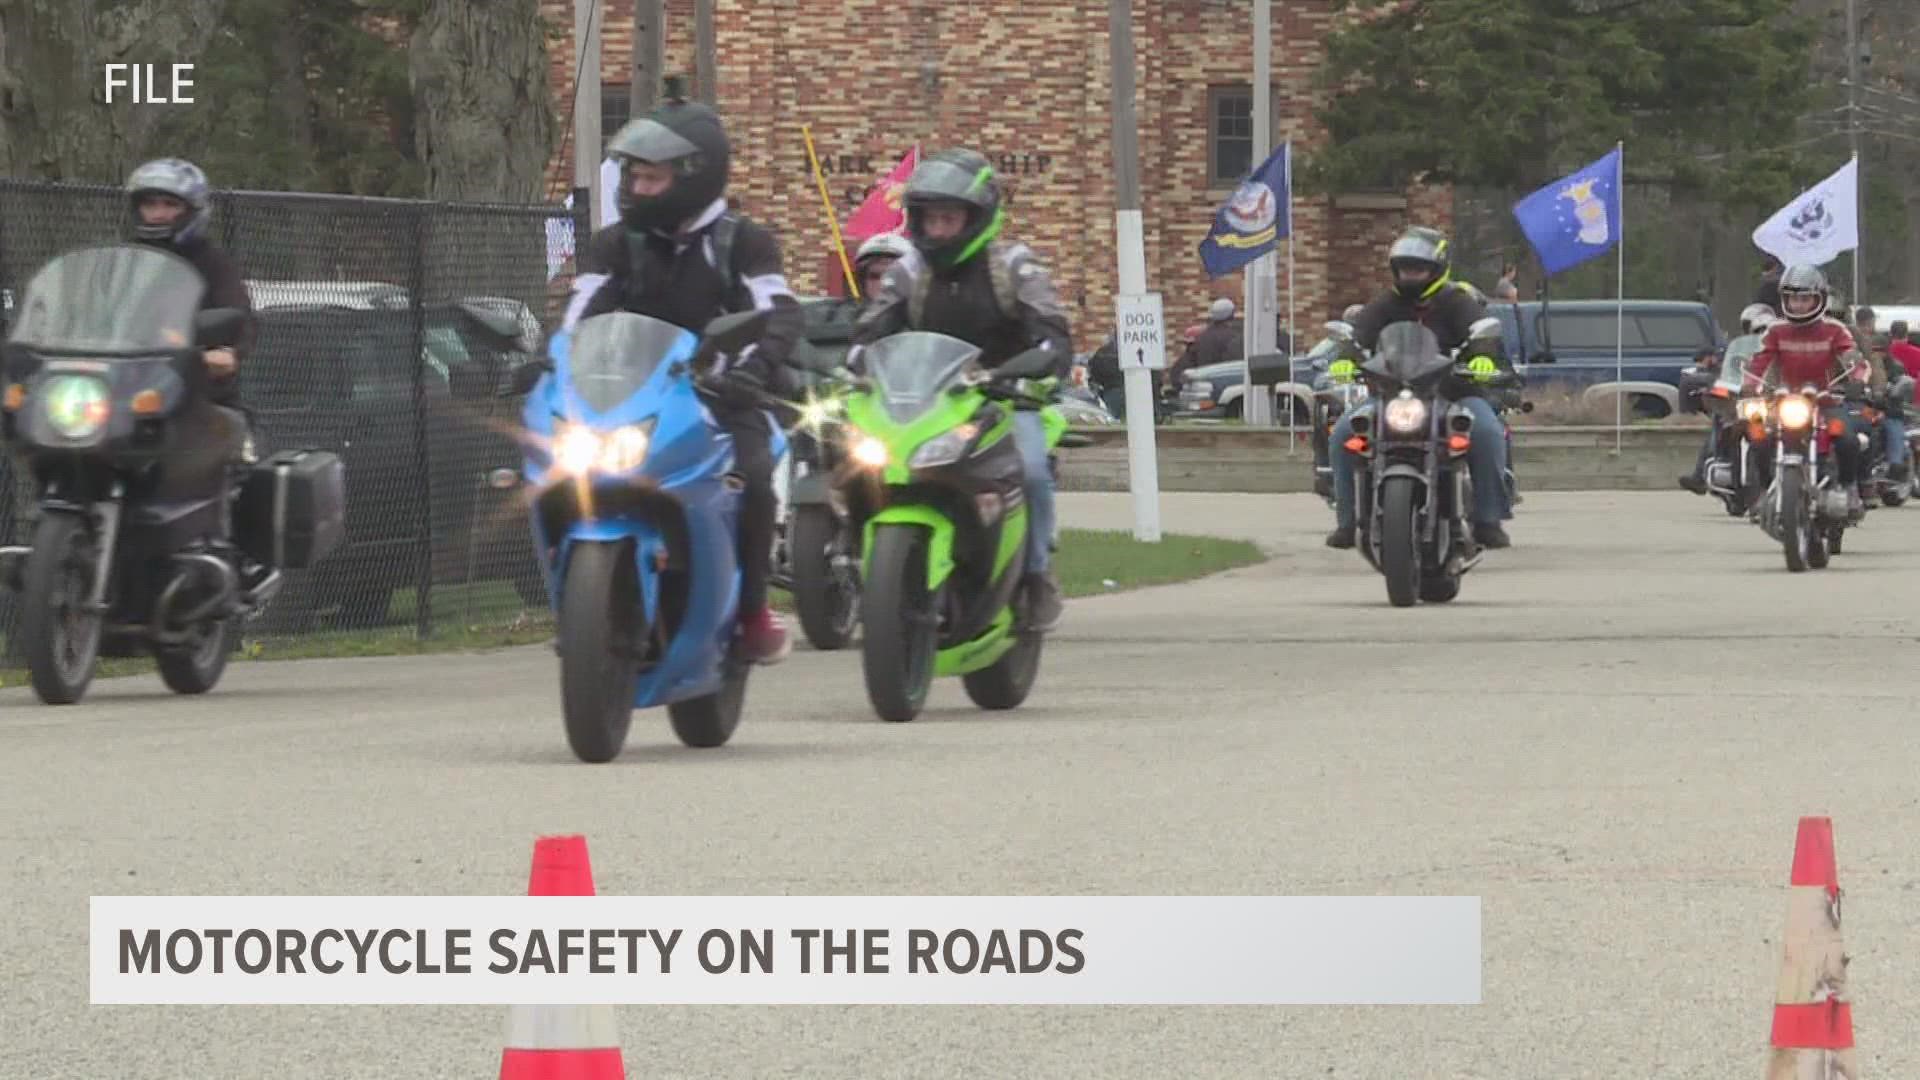 At least two people died in motorcycle crashes, among multiple other accidents, in West Michigan over Memorial Day weekend.